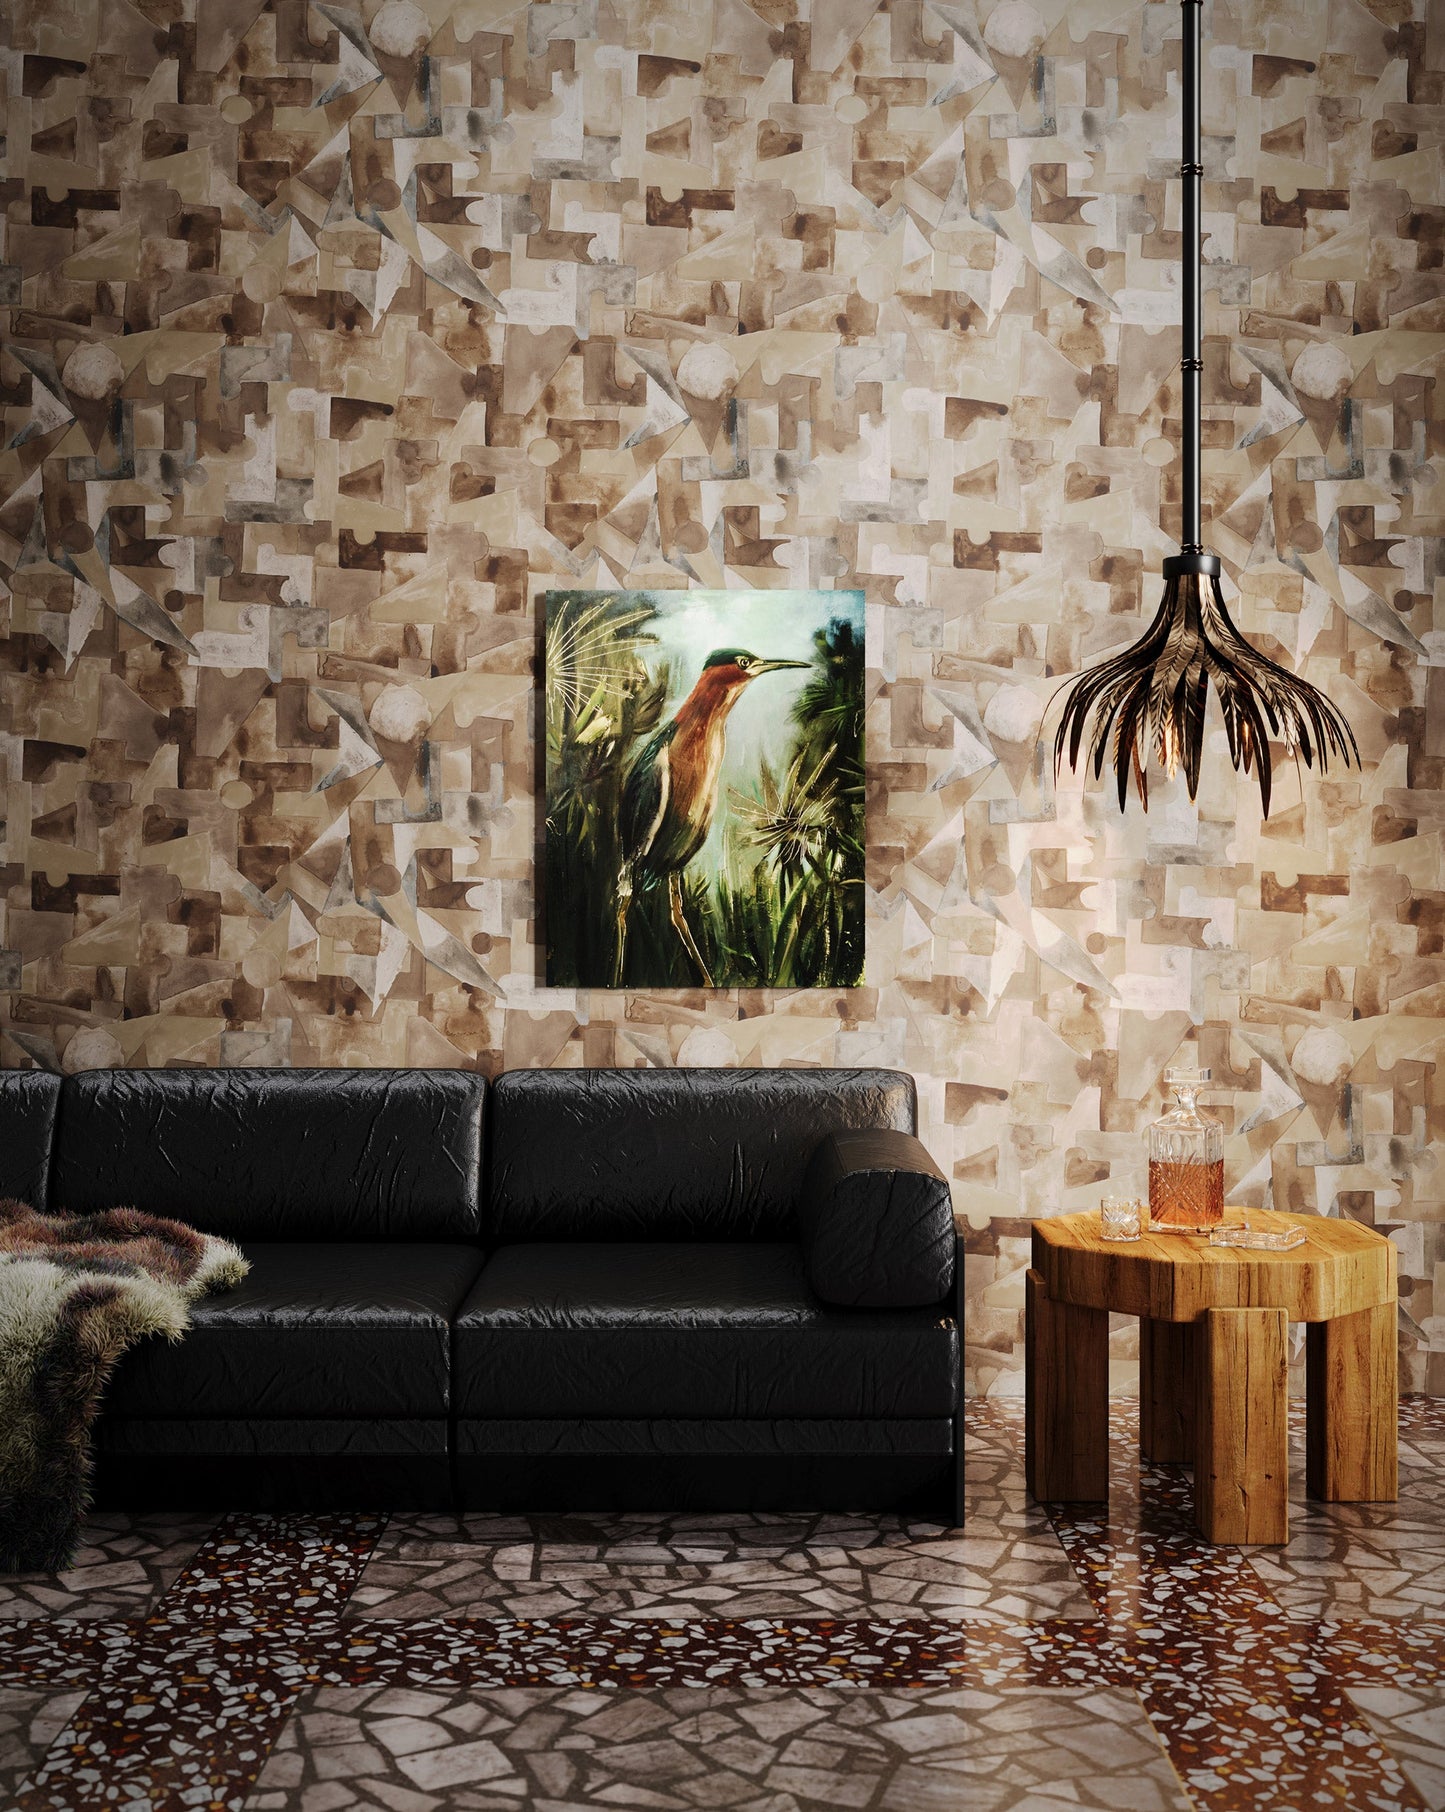 Eskayel's Pieces Garnet wallpaper is an earthy blend of brown hues installed in a living room. 